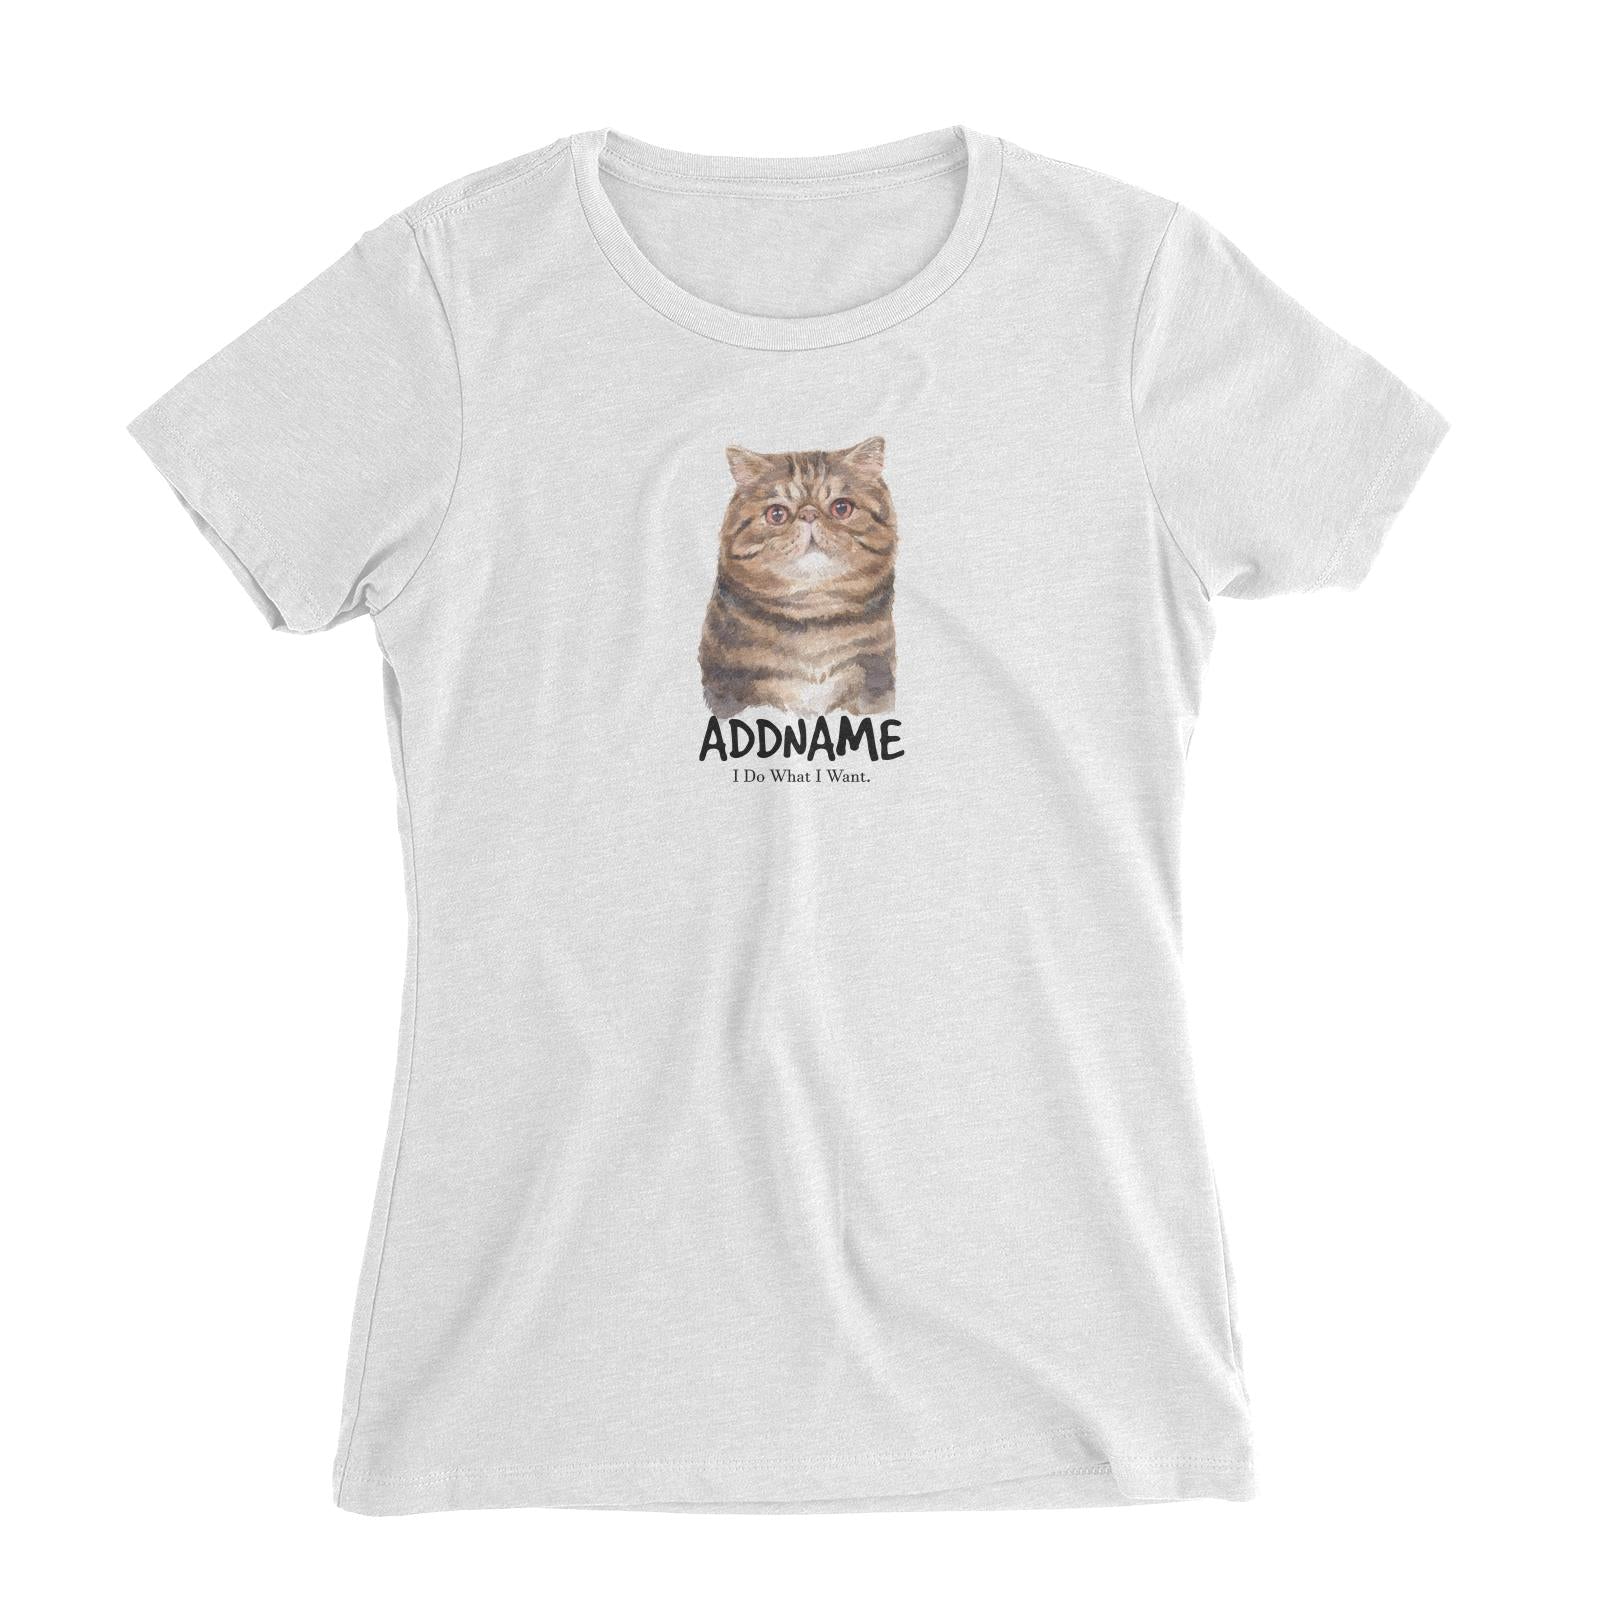 Watercolor Cat Exotic Shorthair I Do What I Want Addname Women's Slim Fit T-Shirt